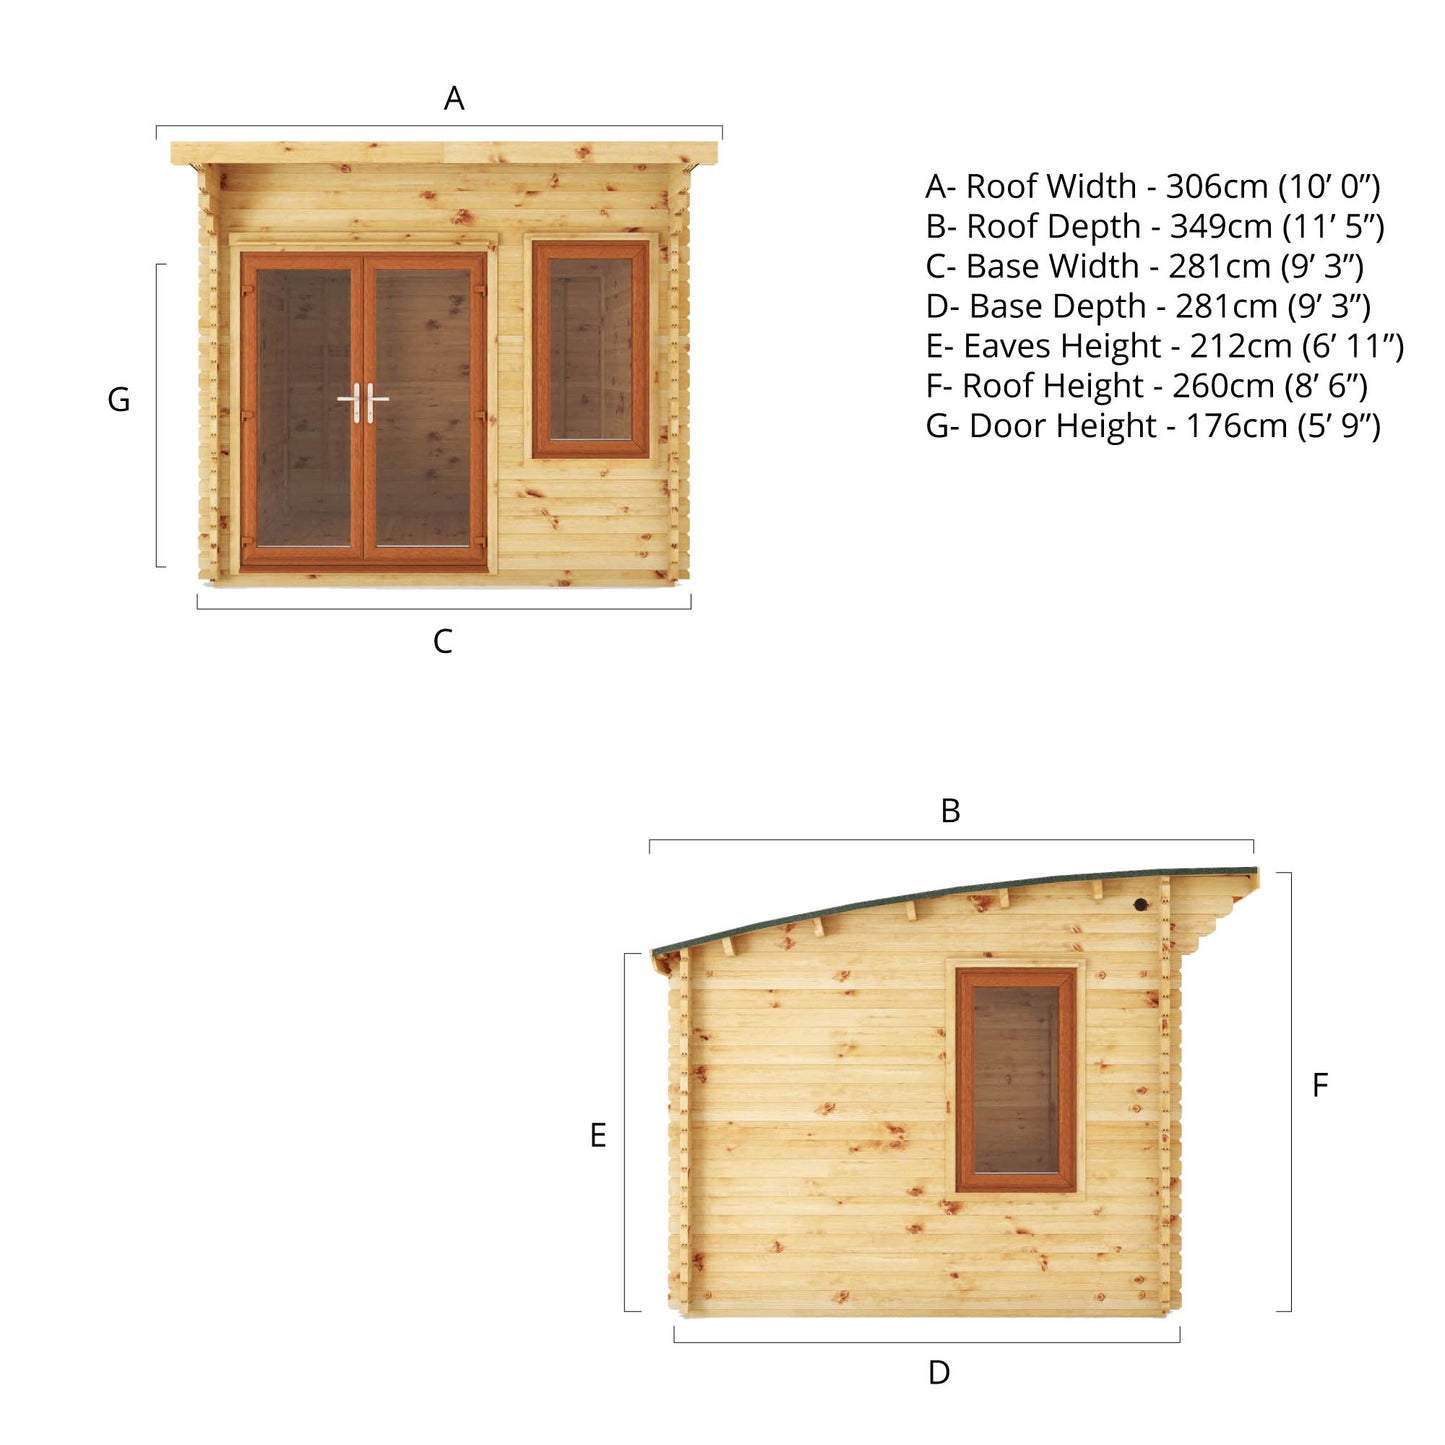 The 3m x 3m Tawny Curved Roof Log Cabin with Oak UPVC